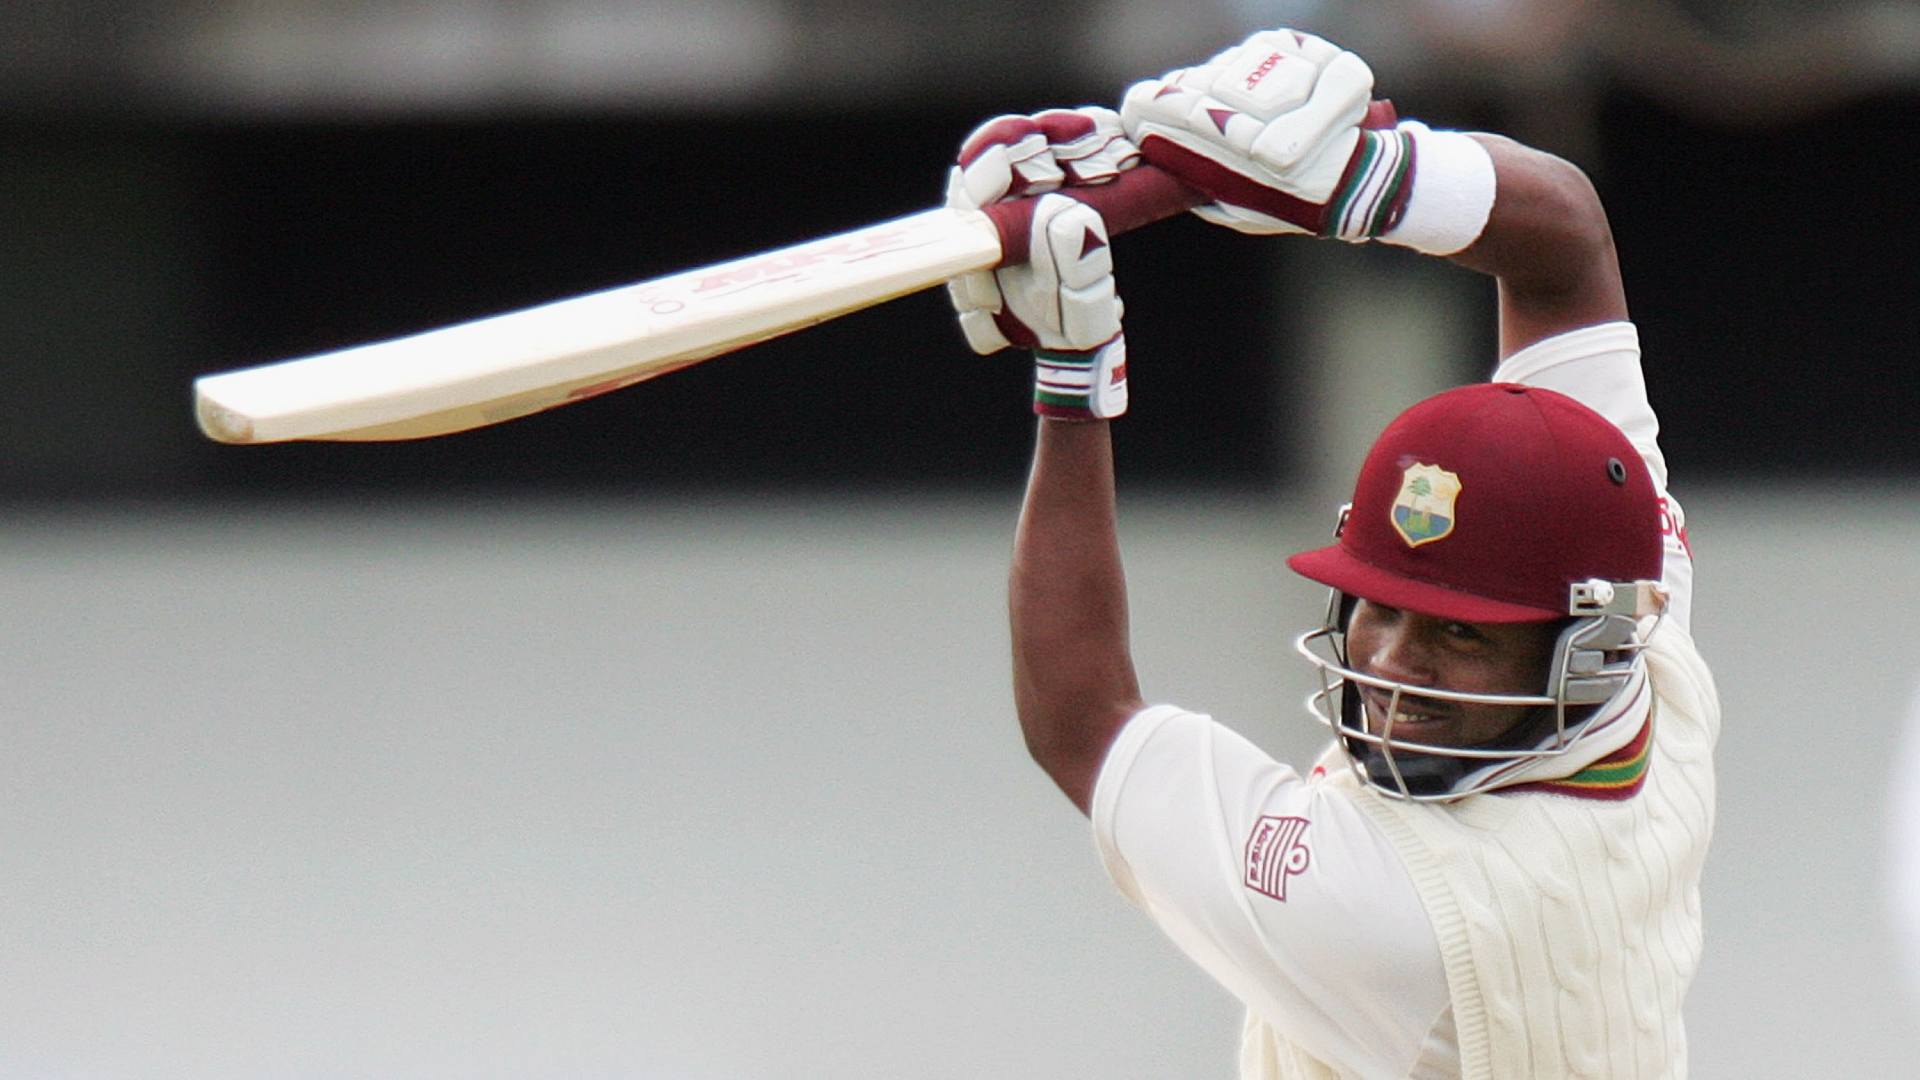 Brian Lara is one the greatest Test batters of all-time (Courtesy: ICC-Cricket.com)